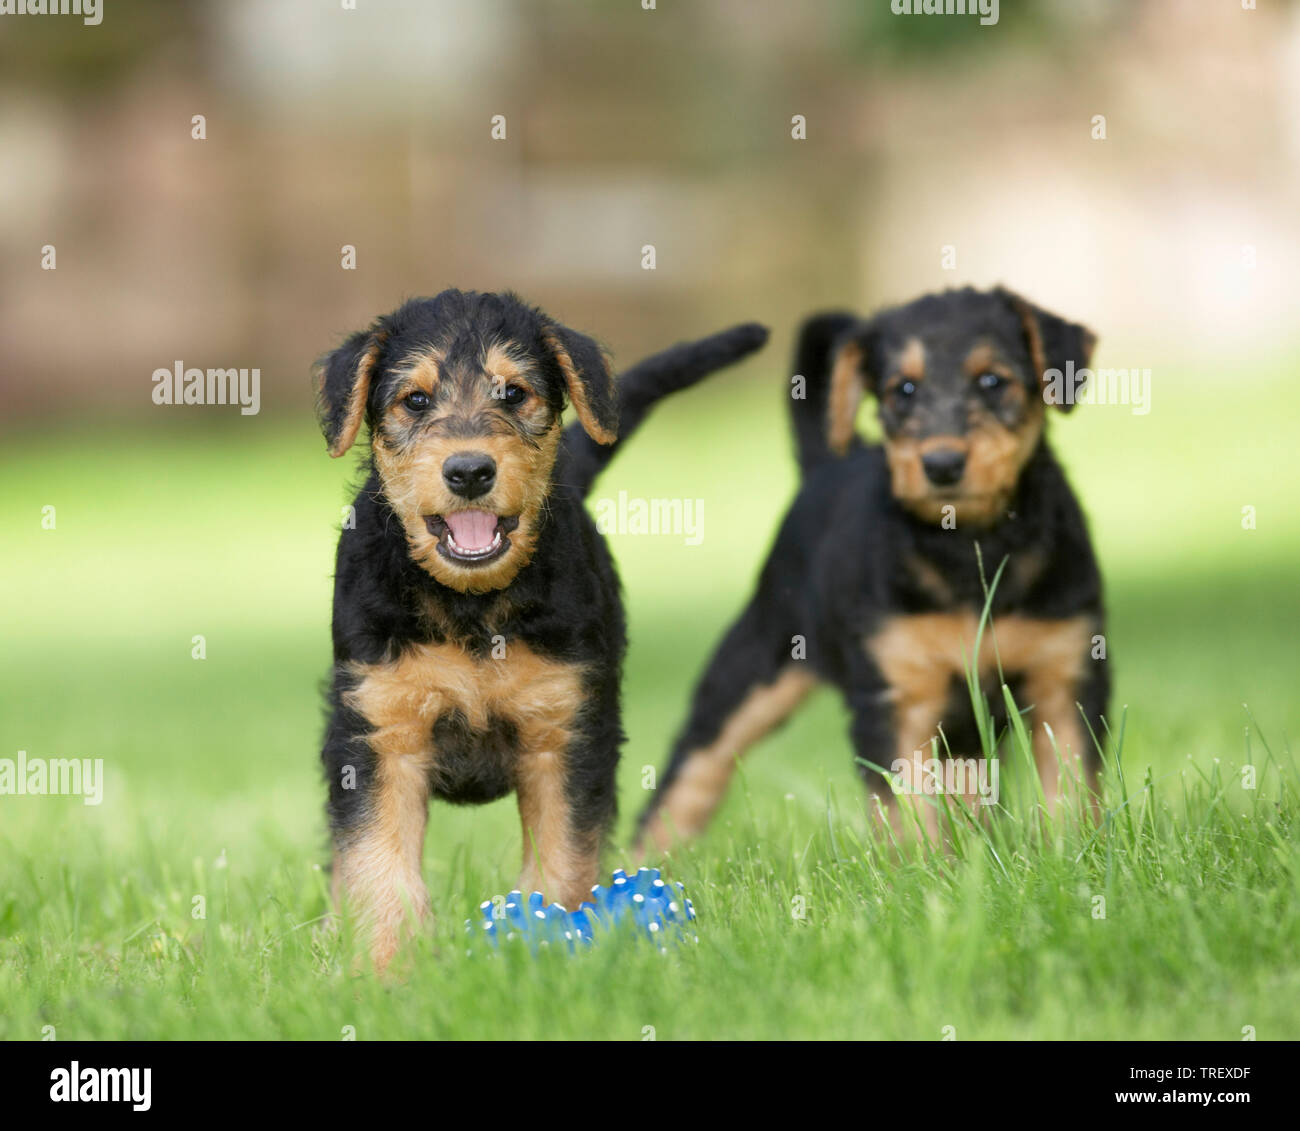 Airedale Terrier. Two puppies standing next to blue toy bone in grass. Germany Stock Photo